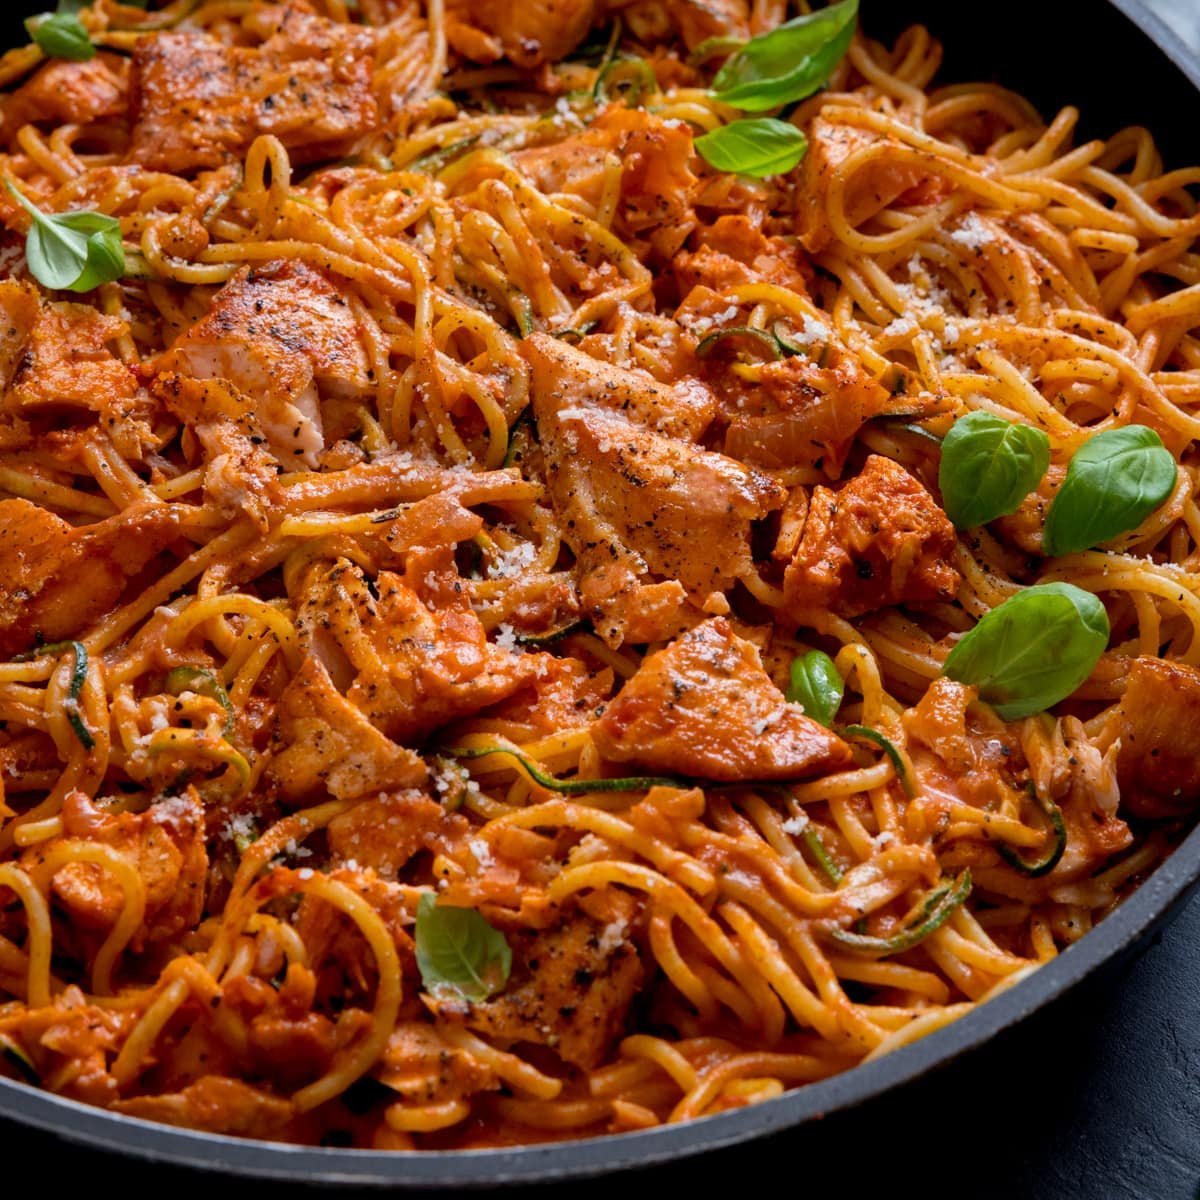 Spaghetti and pieces of salmon on a creamy tomato sauce in a pan